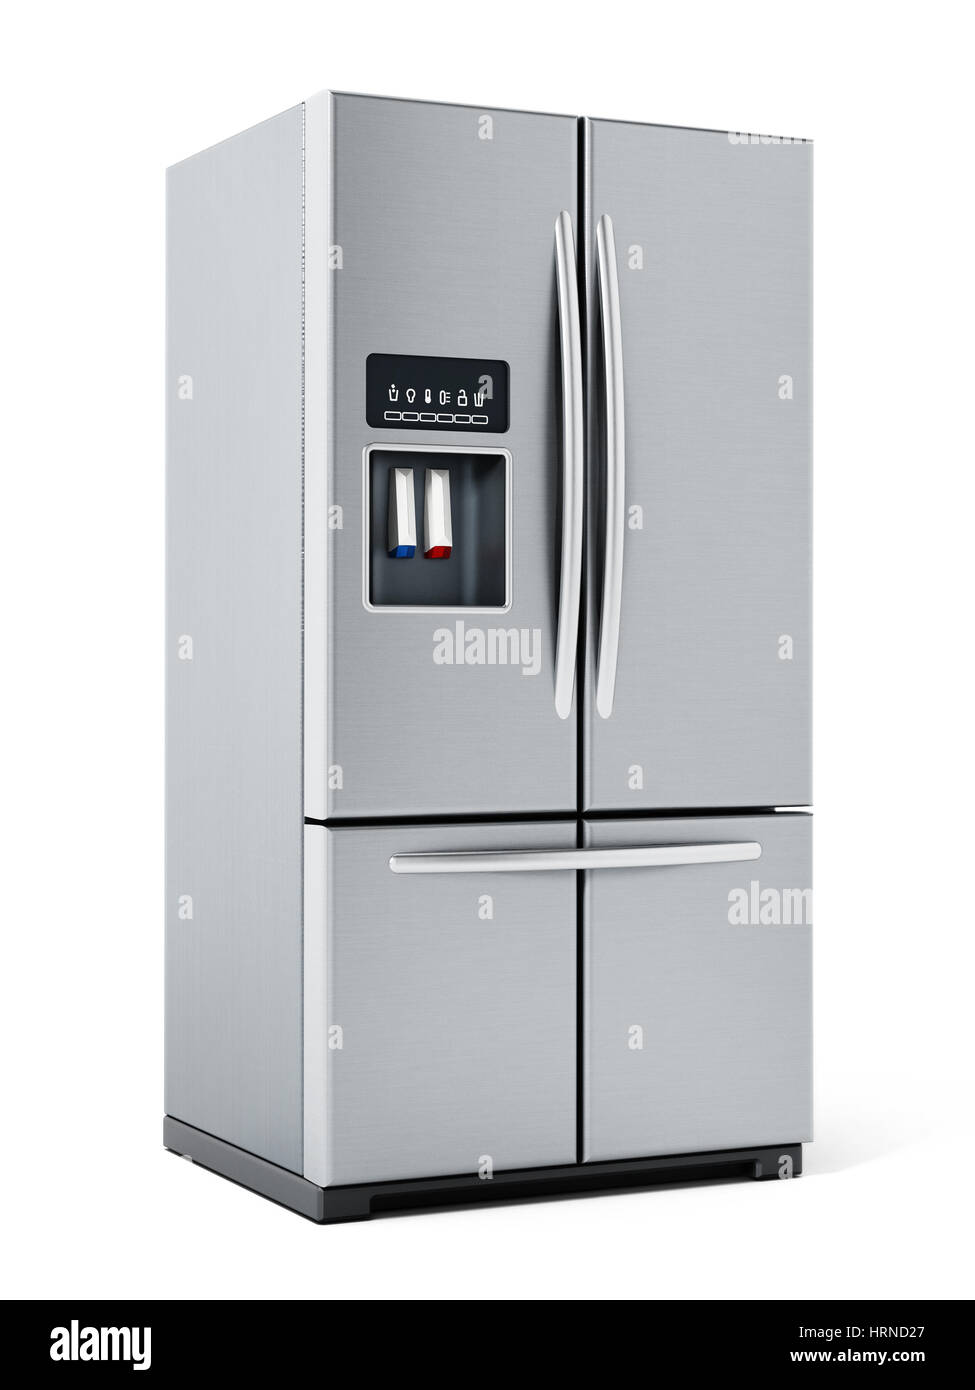 Generic silver refrigerator isolated on white background. 3D illustration. Stock Photo